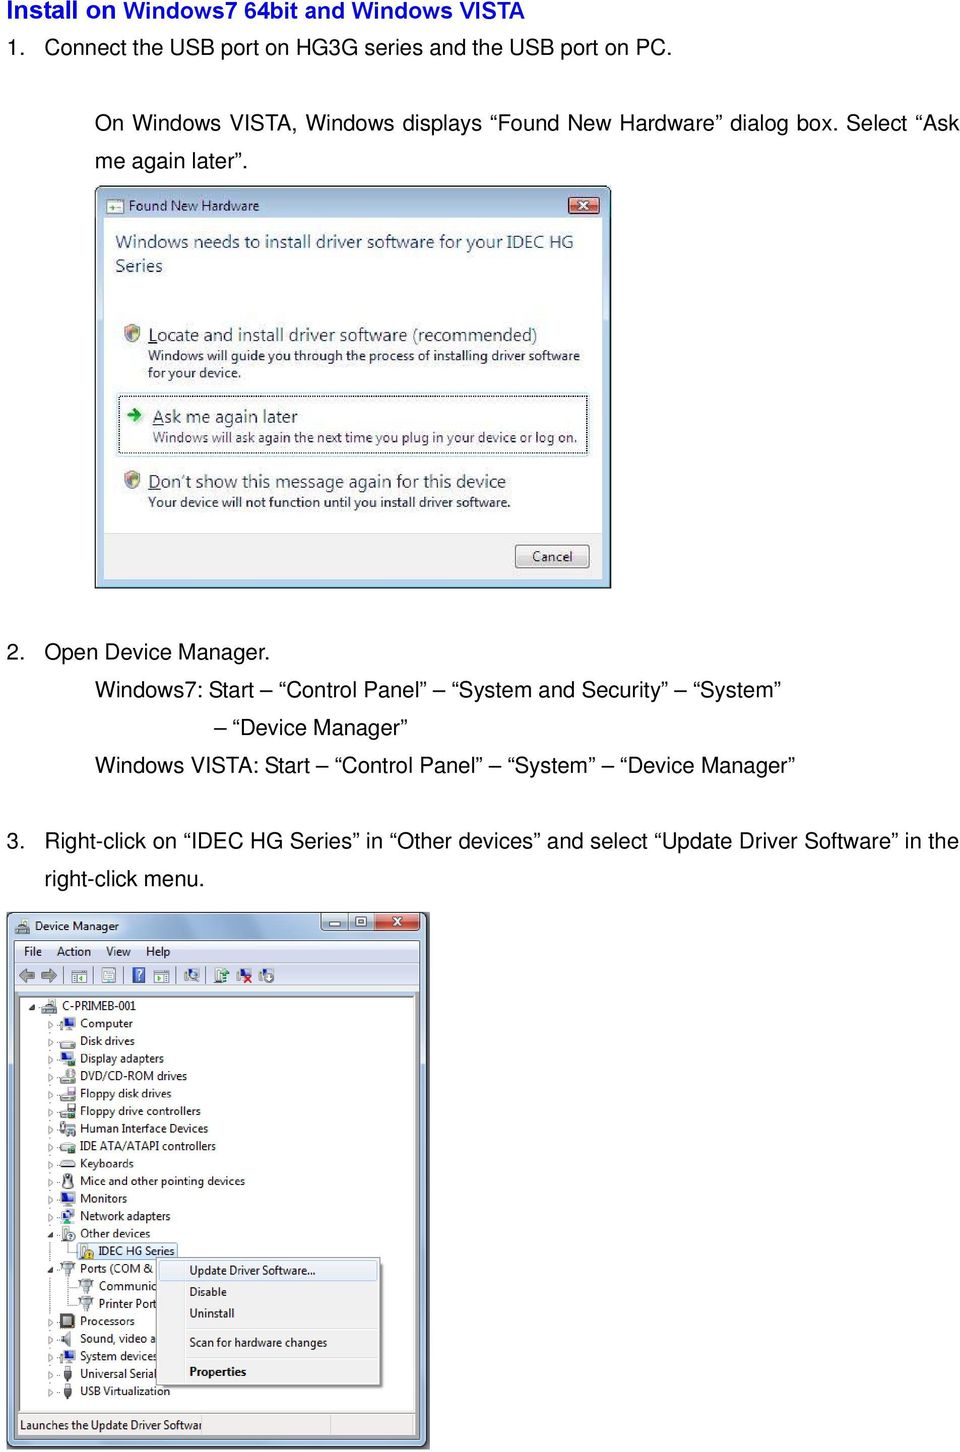 Windows7: Start Control Panel System and Security System Device Manager Windows VISTA: Start Control Panel System